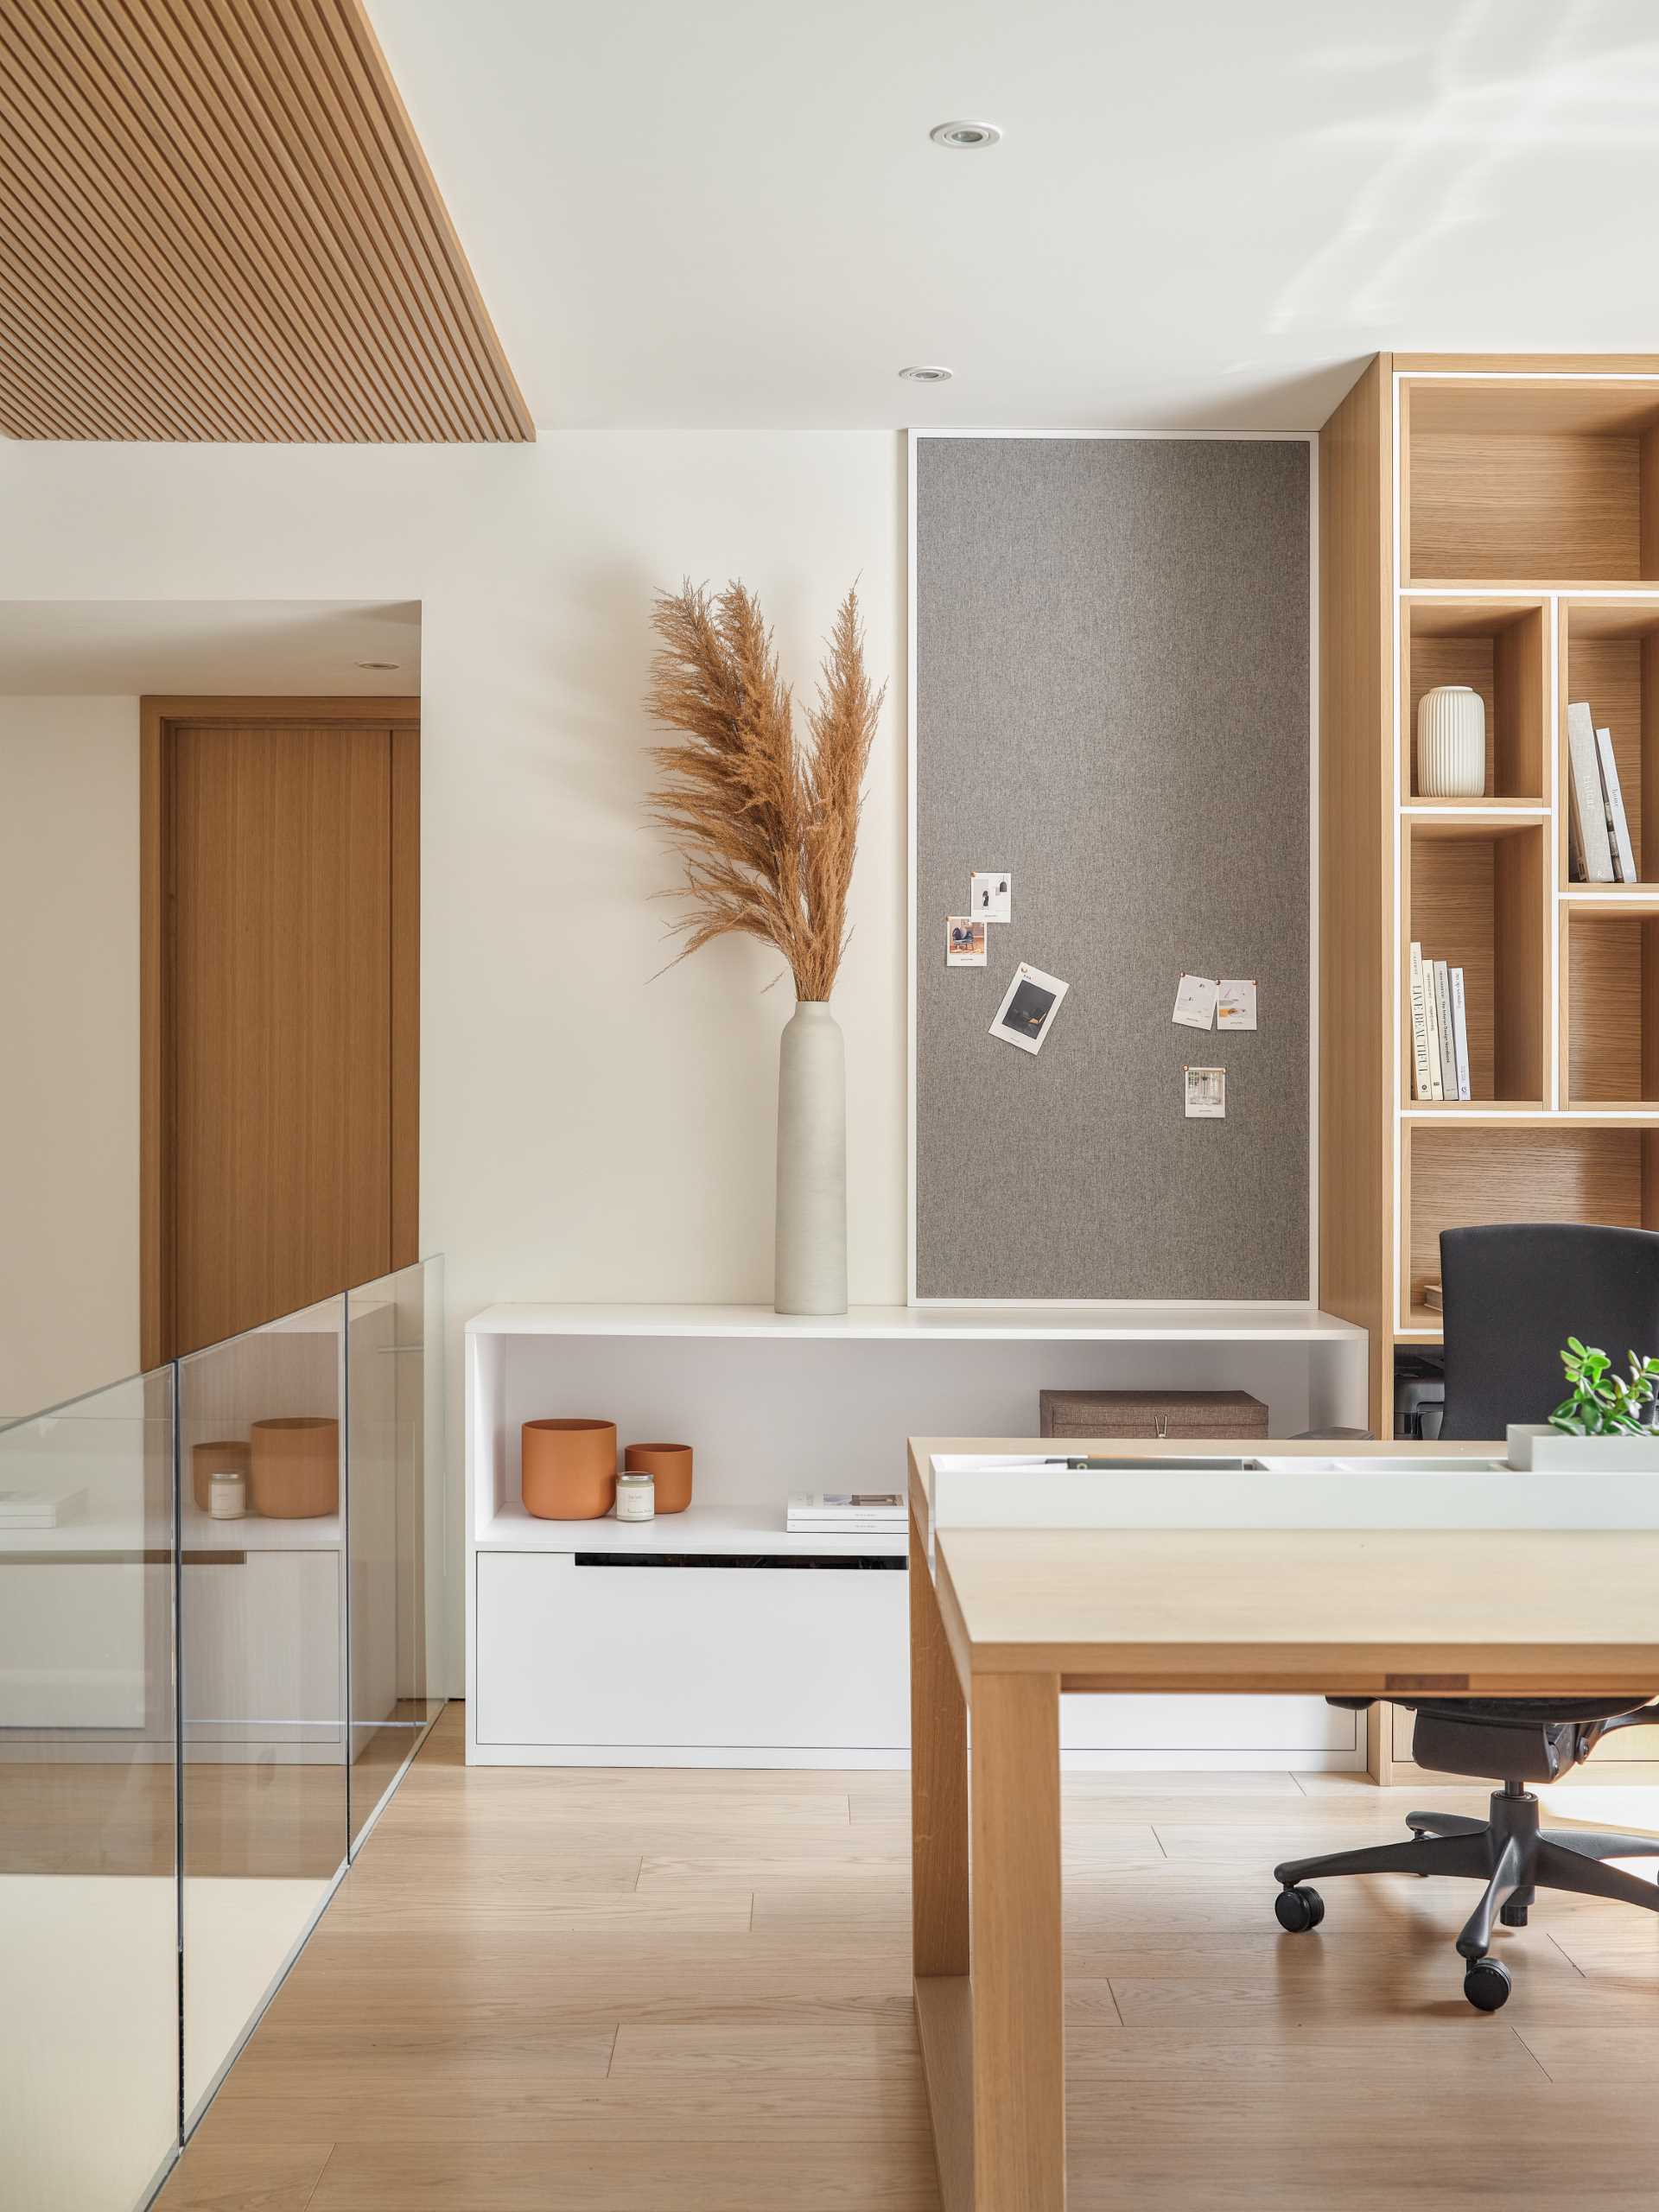 At the top of the stairs there's a home office, with built-in bookshelves and a desk.